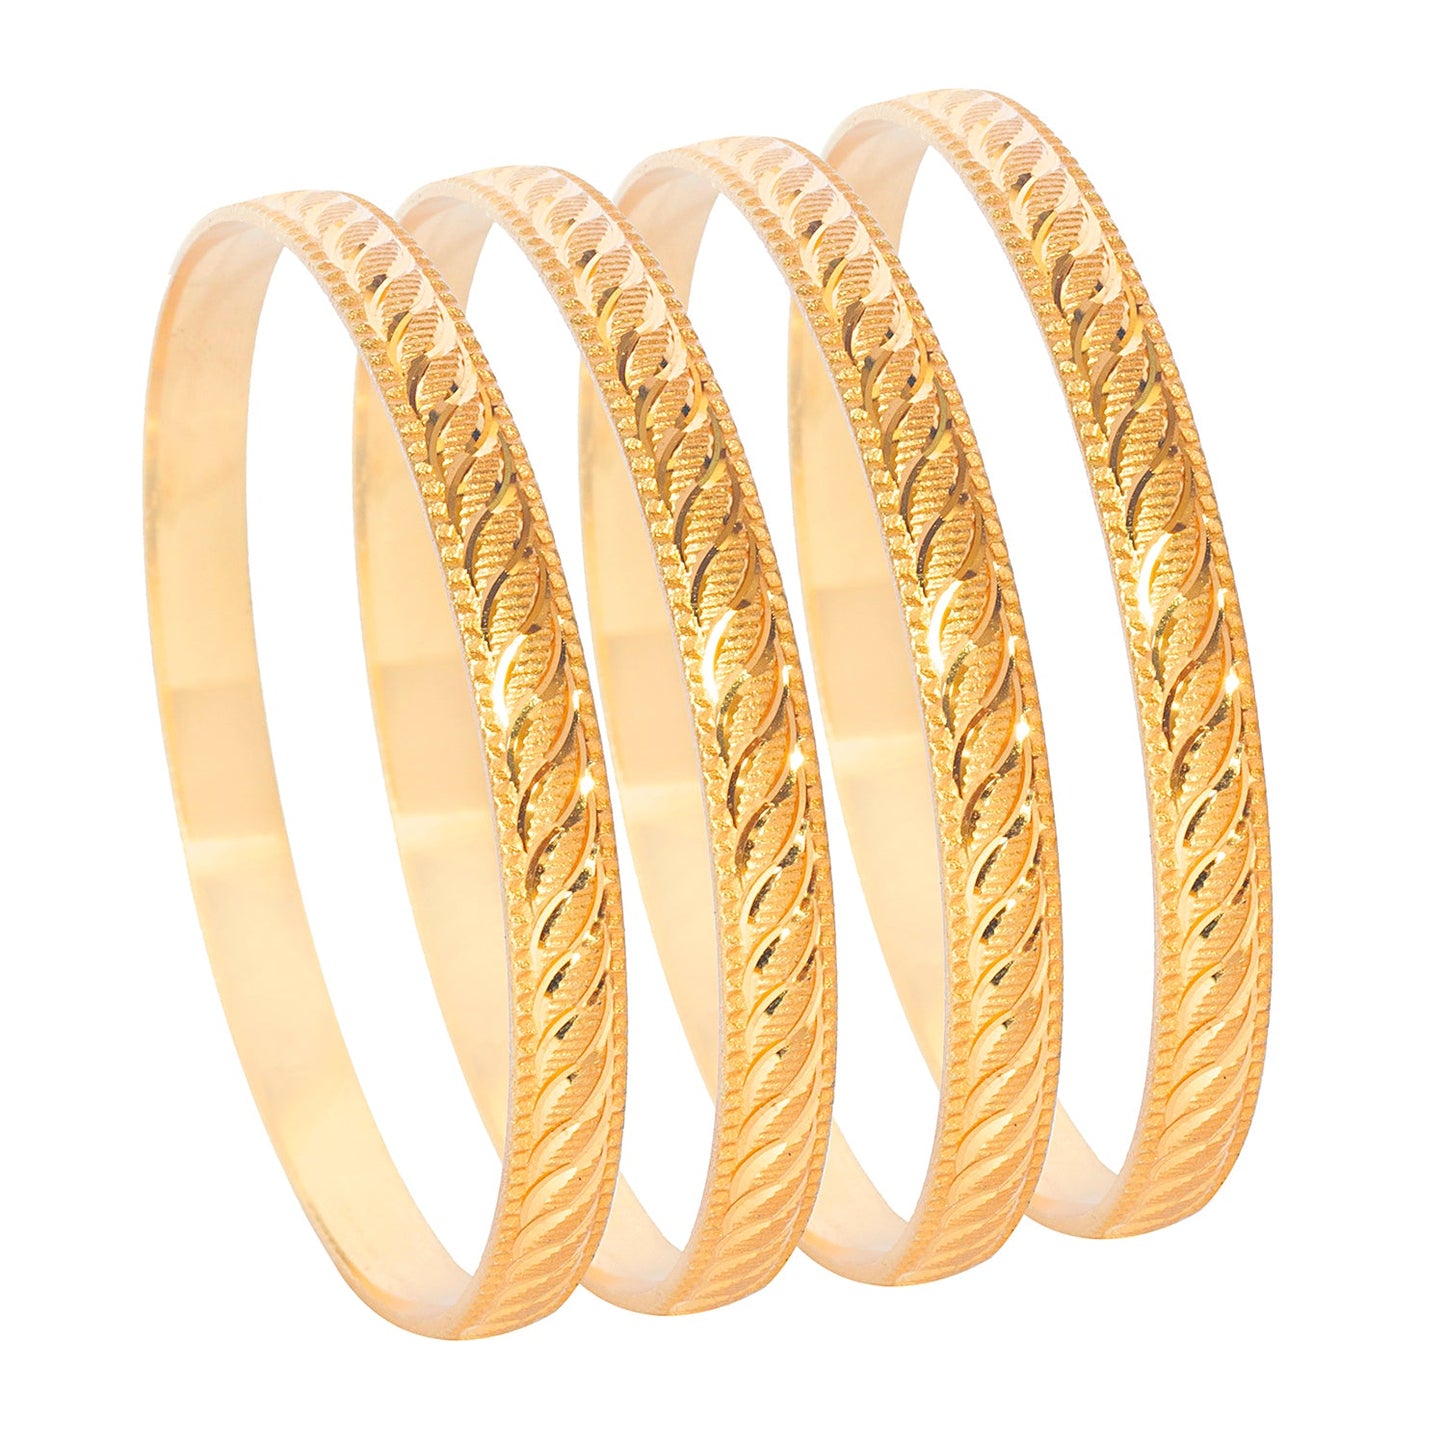 Shining Jewel Gold Plated Traditional Designer Bangles for Women (Pack of 4) SJ_3375_2.8